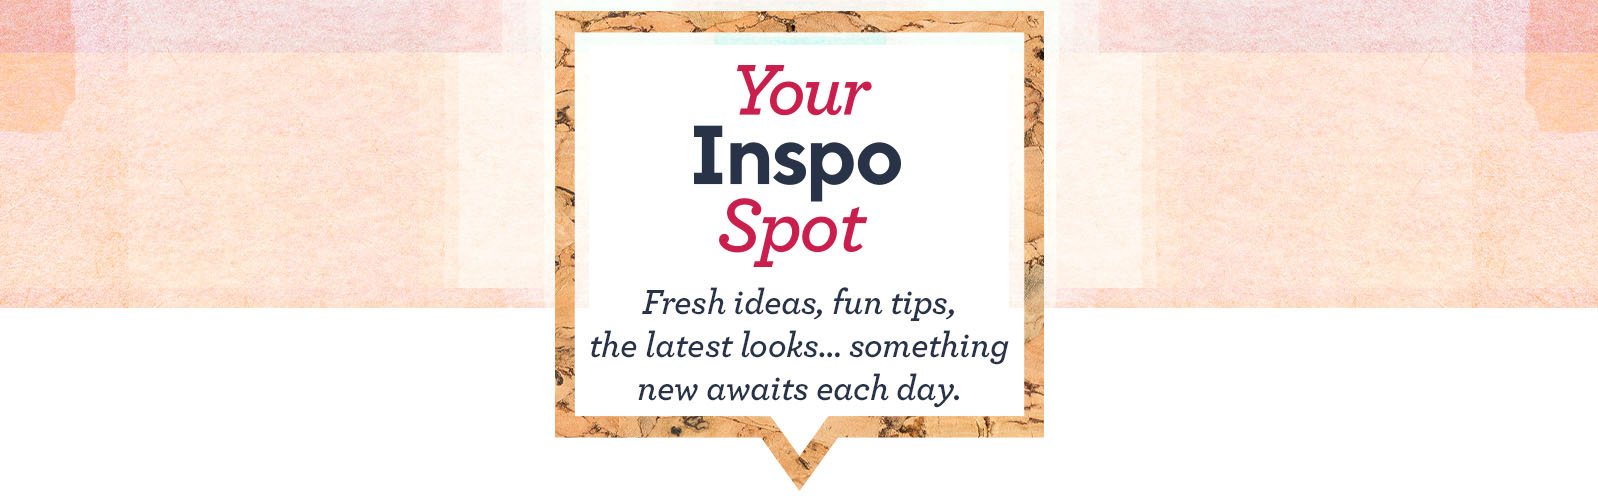 Your Inspo Spot  - Fresh ideas, fun tips, the latest looks…something new awaits each day.